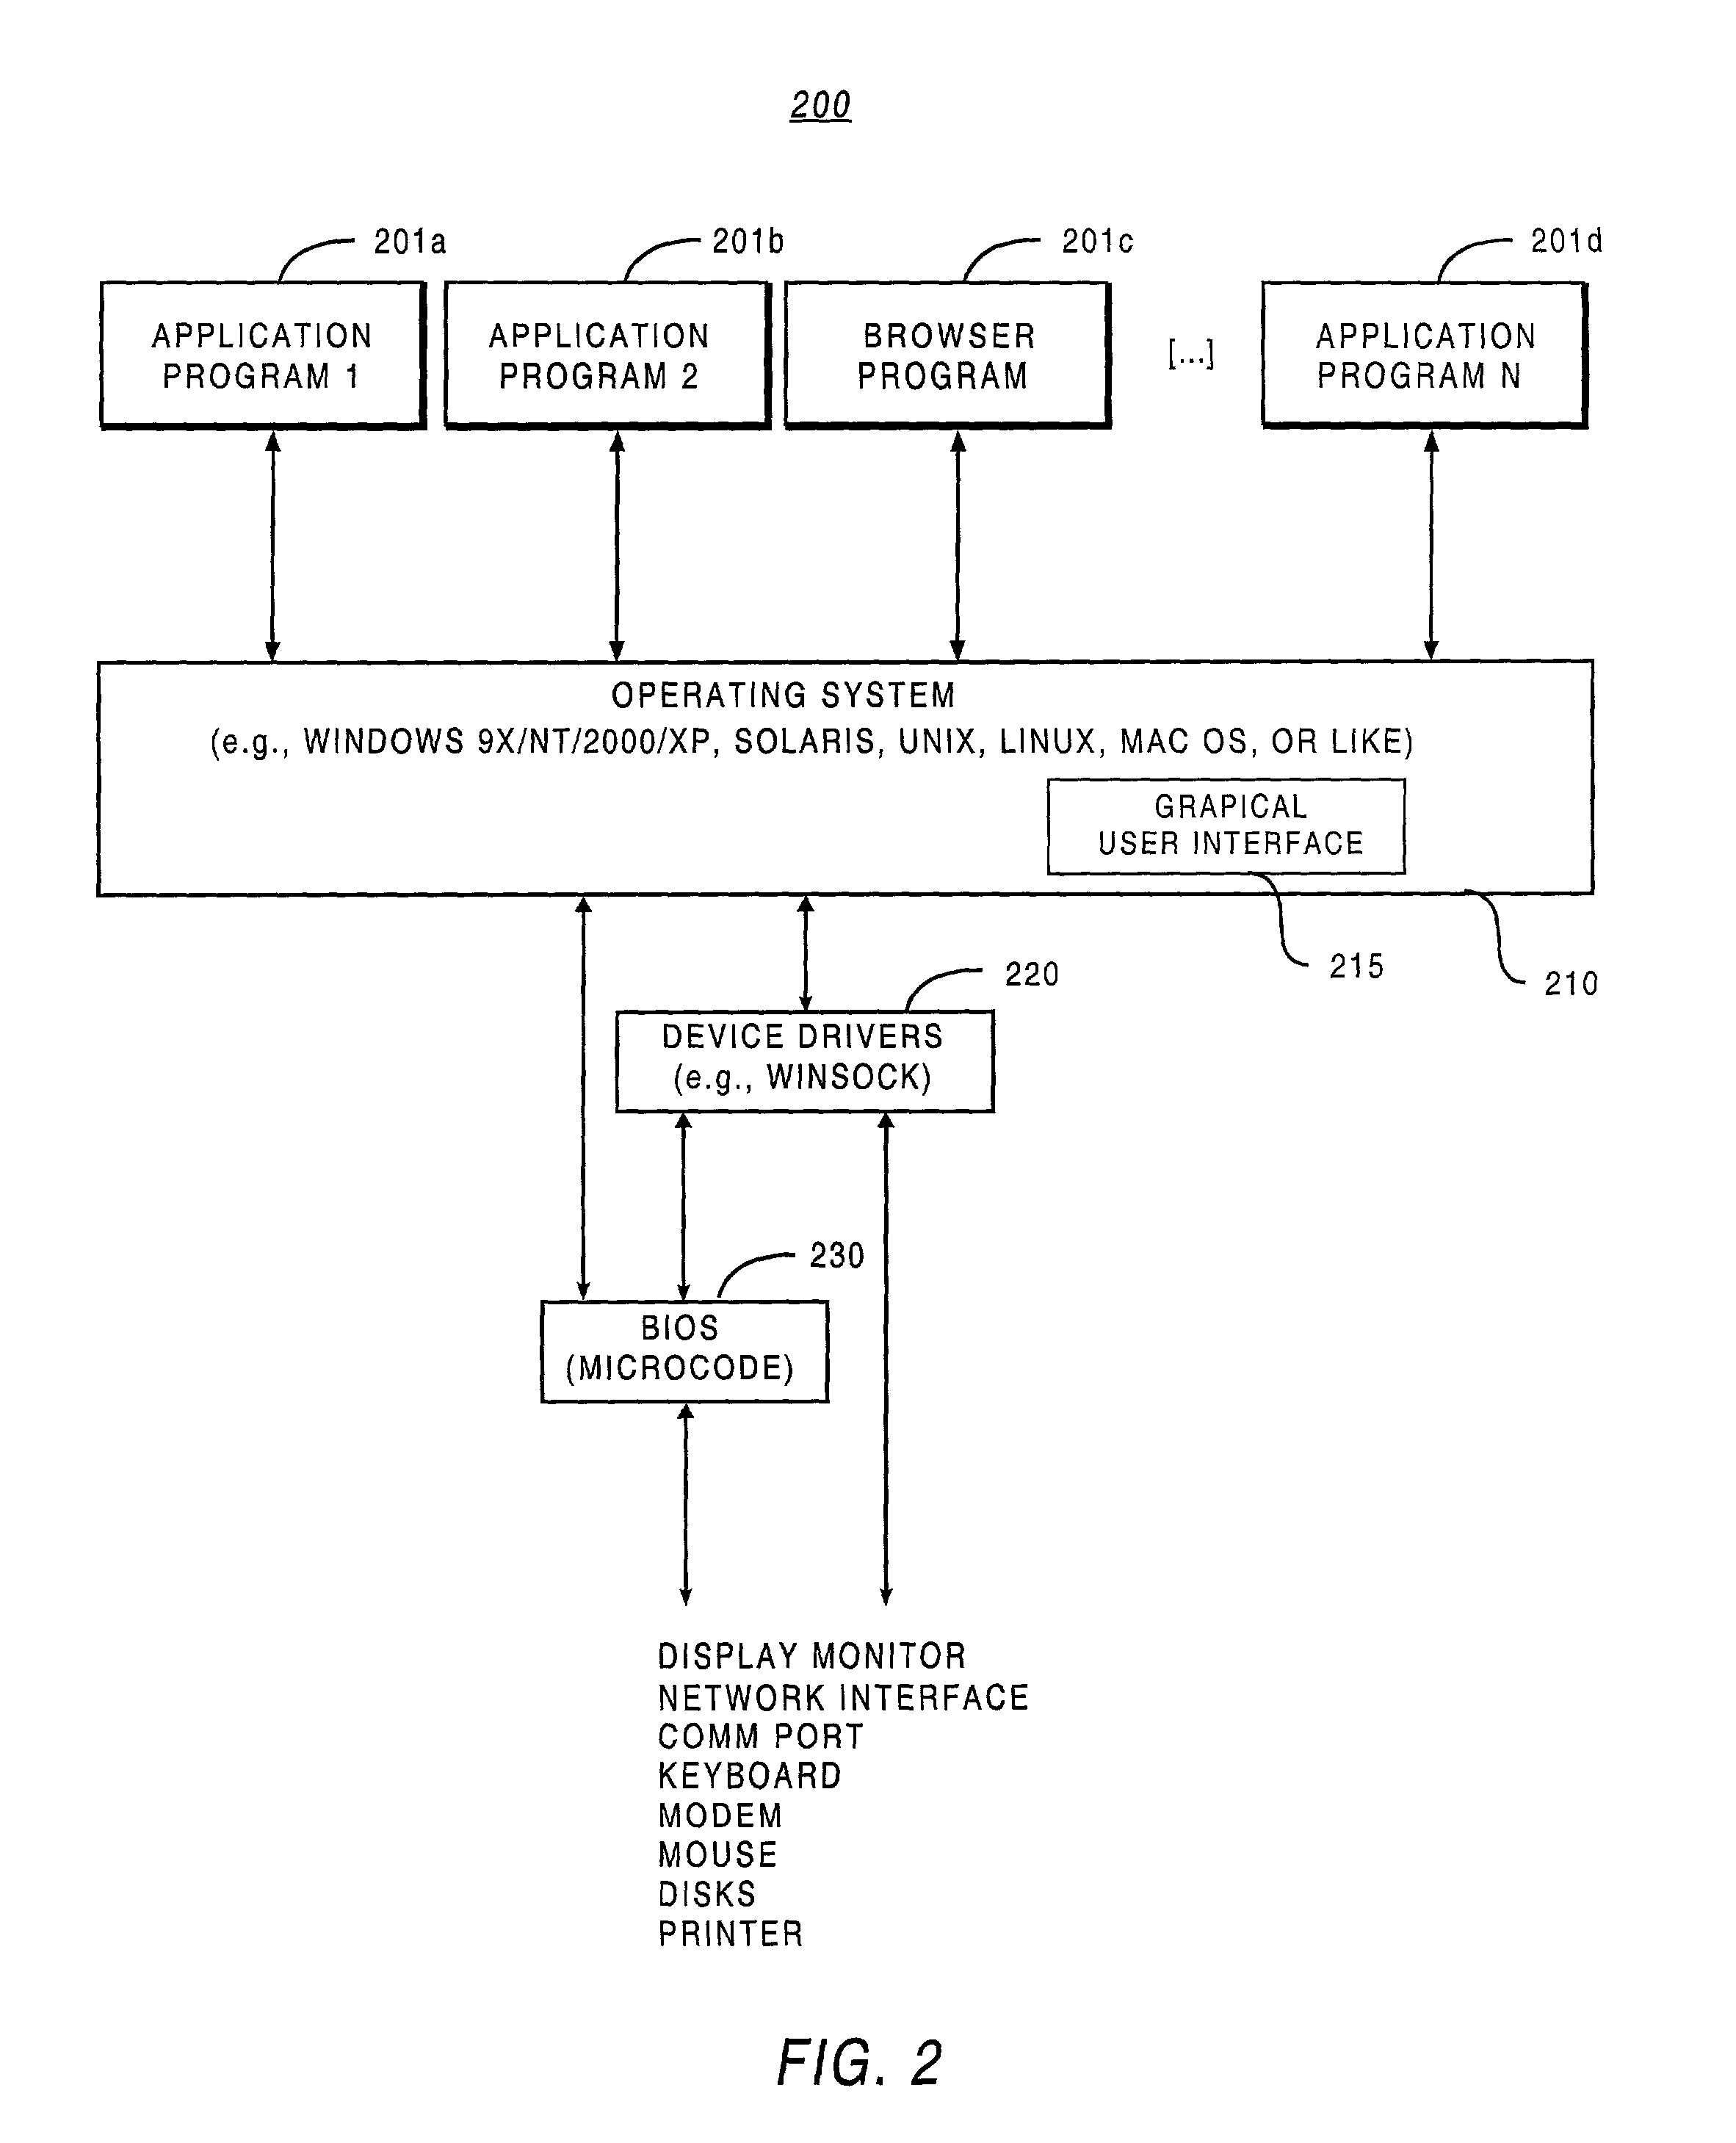 Methodology providing high-speed shared memory access between database middle tier and database server